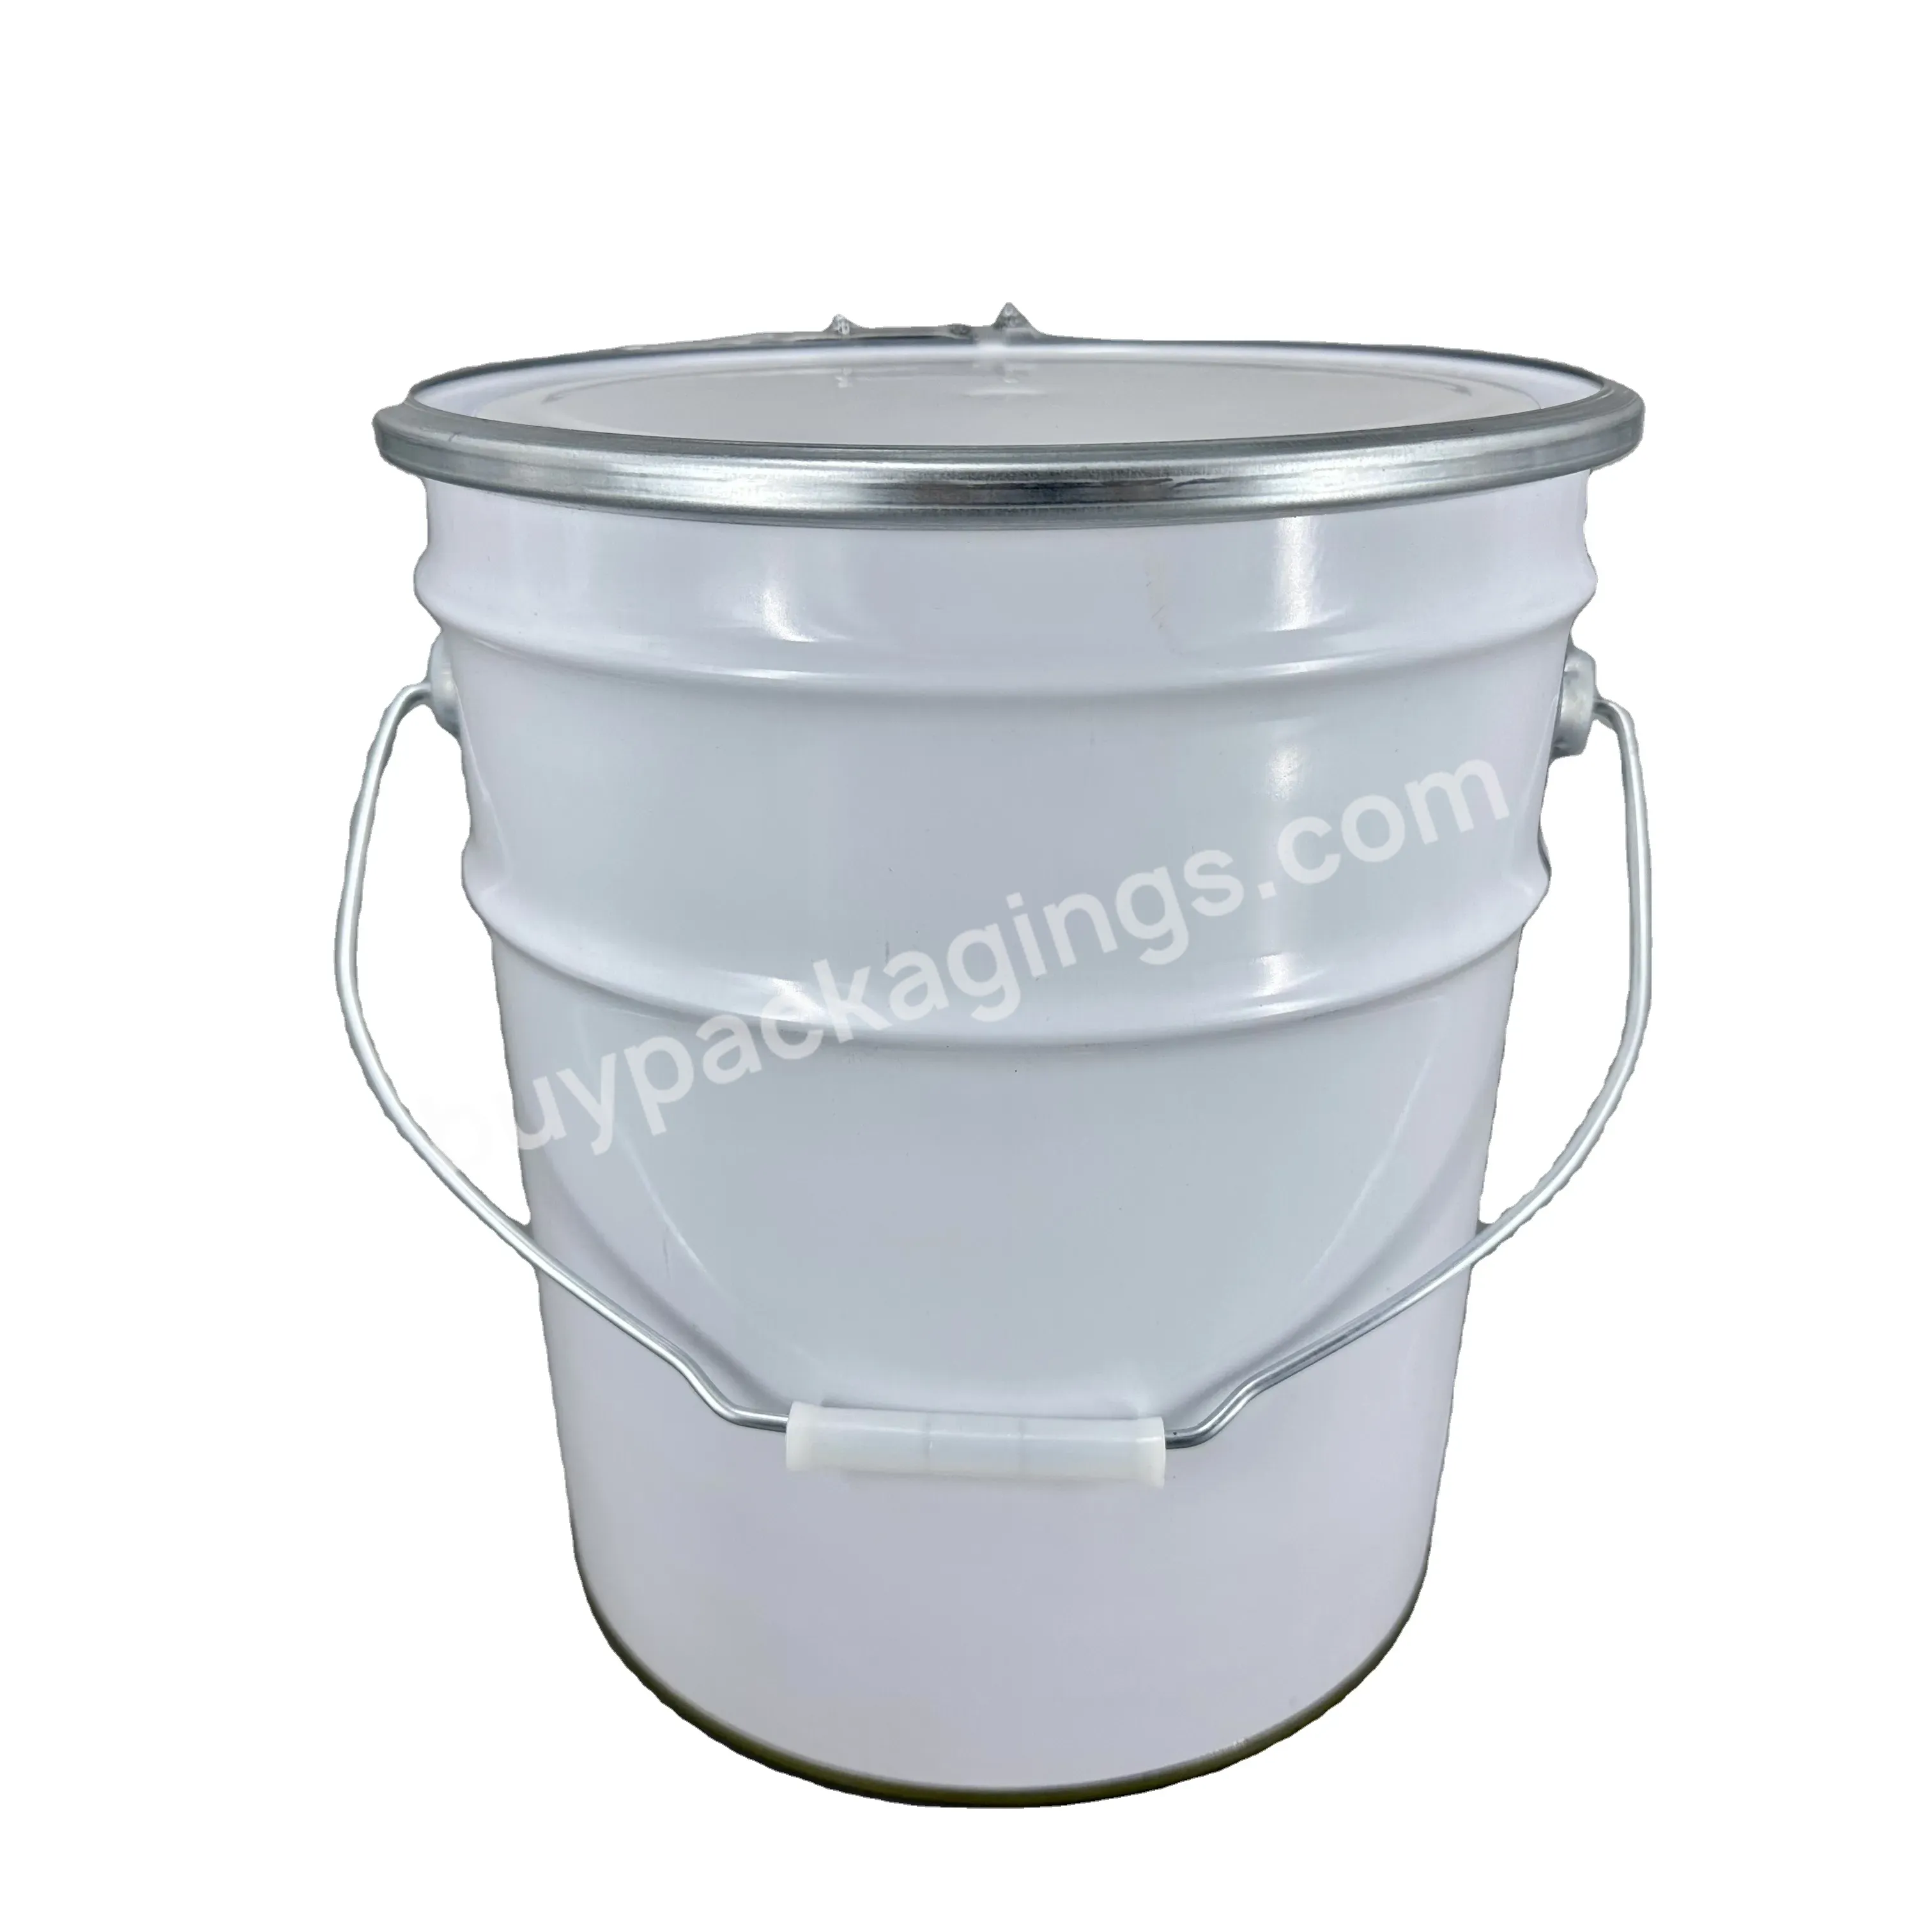 Wholesale 10l Metal Open Hand Pails High Quality Tin Oil Steel Drum Packing With Lock Ring Lid For Paint/chemical - Buy 10l Metal Open Head Pails,High Quality Tin Oil Steel Drum Packing,With Lock Ring Lid For Paint/chemical.